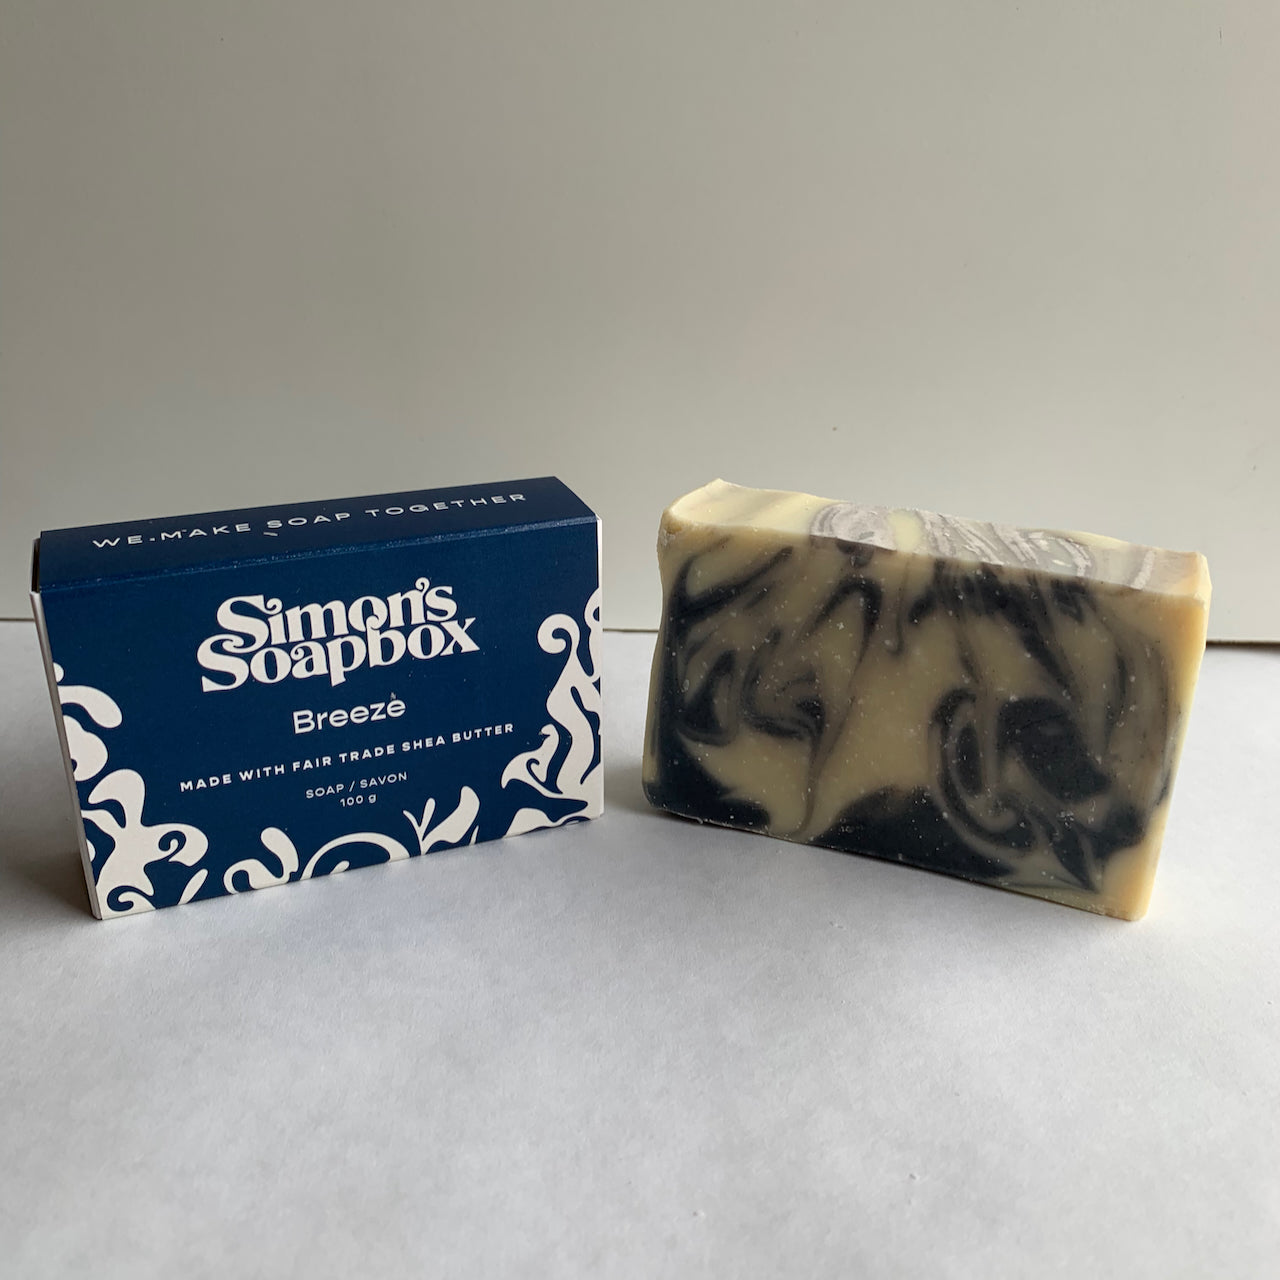 two bars of soap, one with blue swirls, one in a blue box